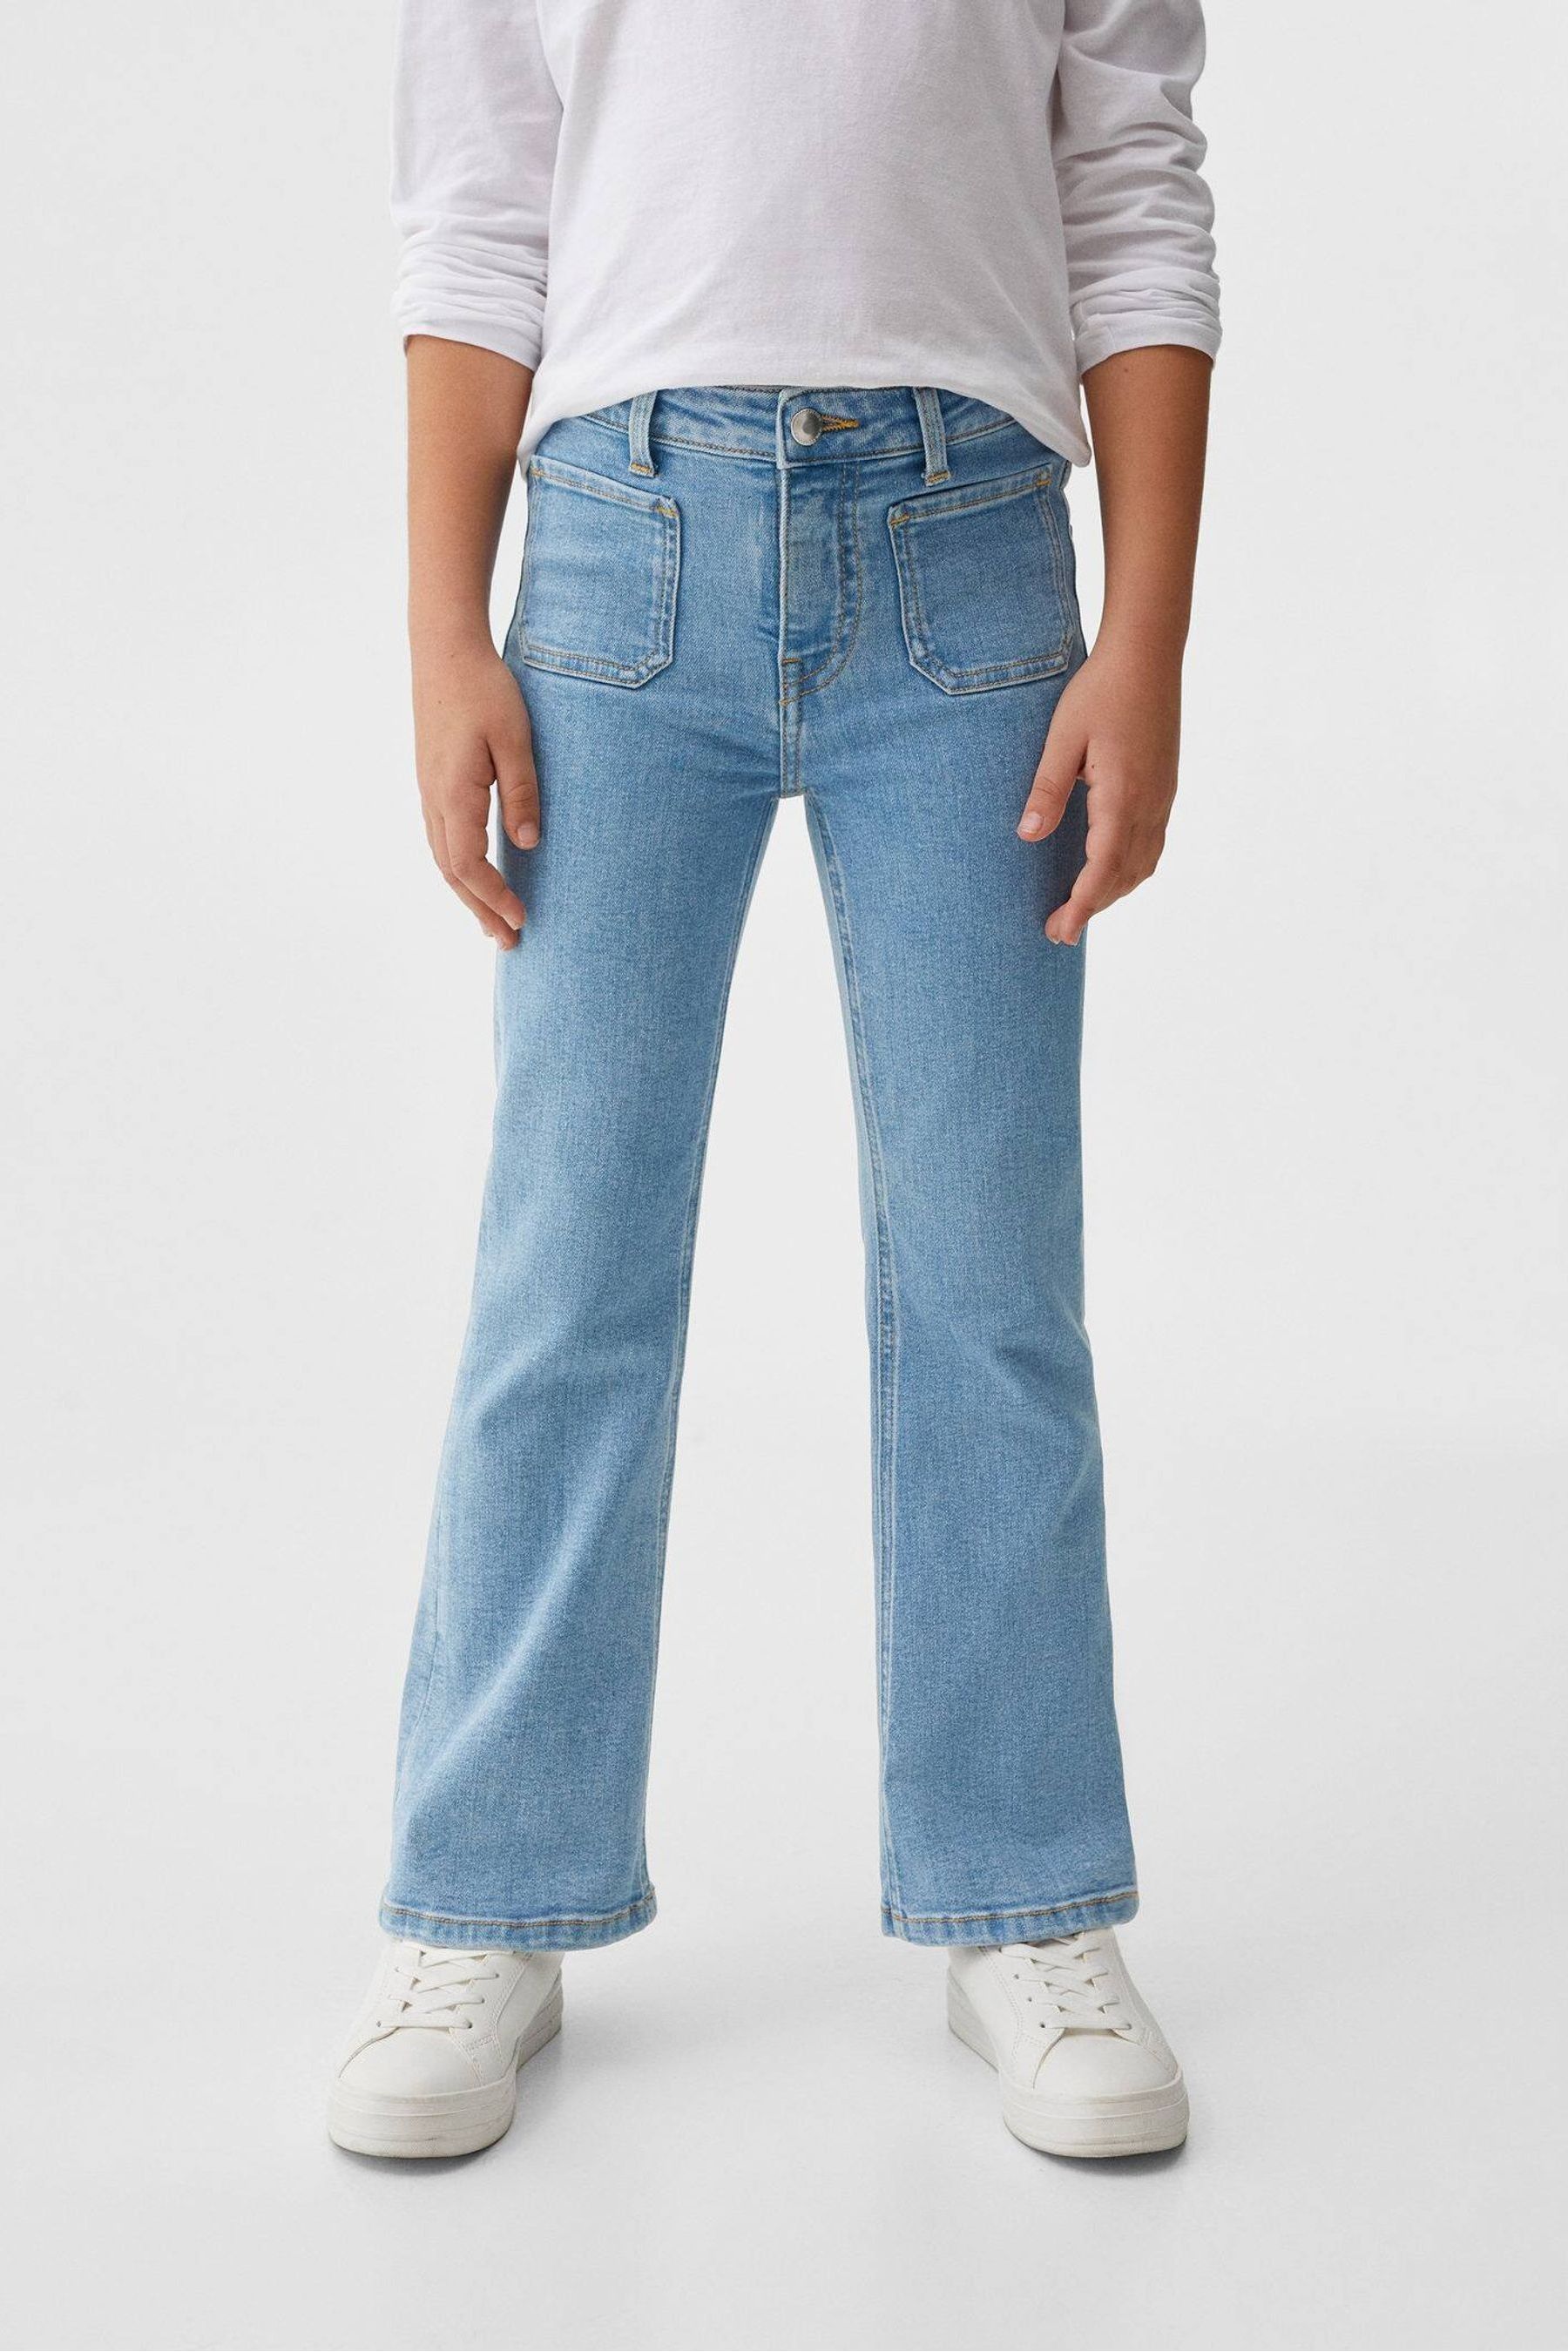 Buy Mango Flared Jeans With Pocket from the Next UK online shop